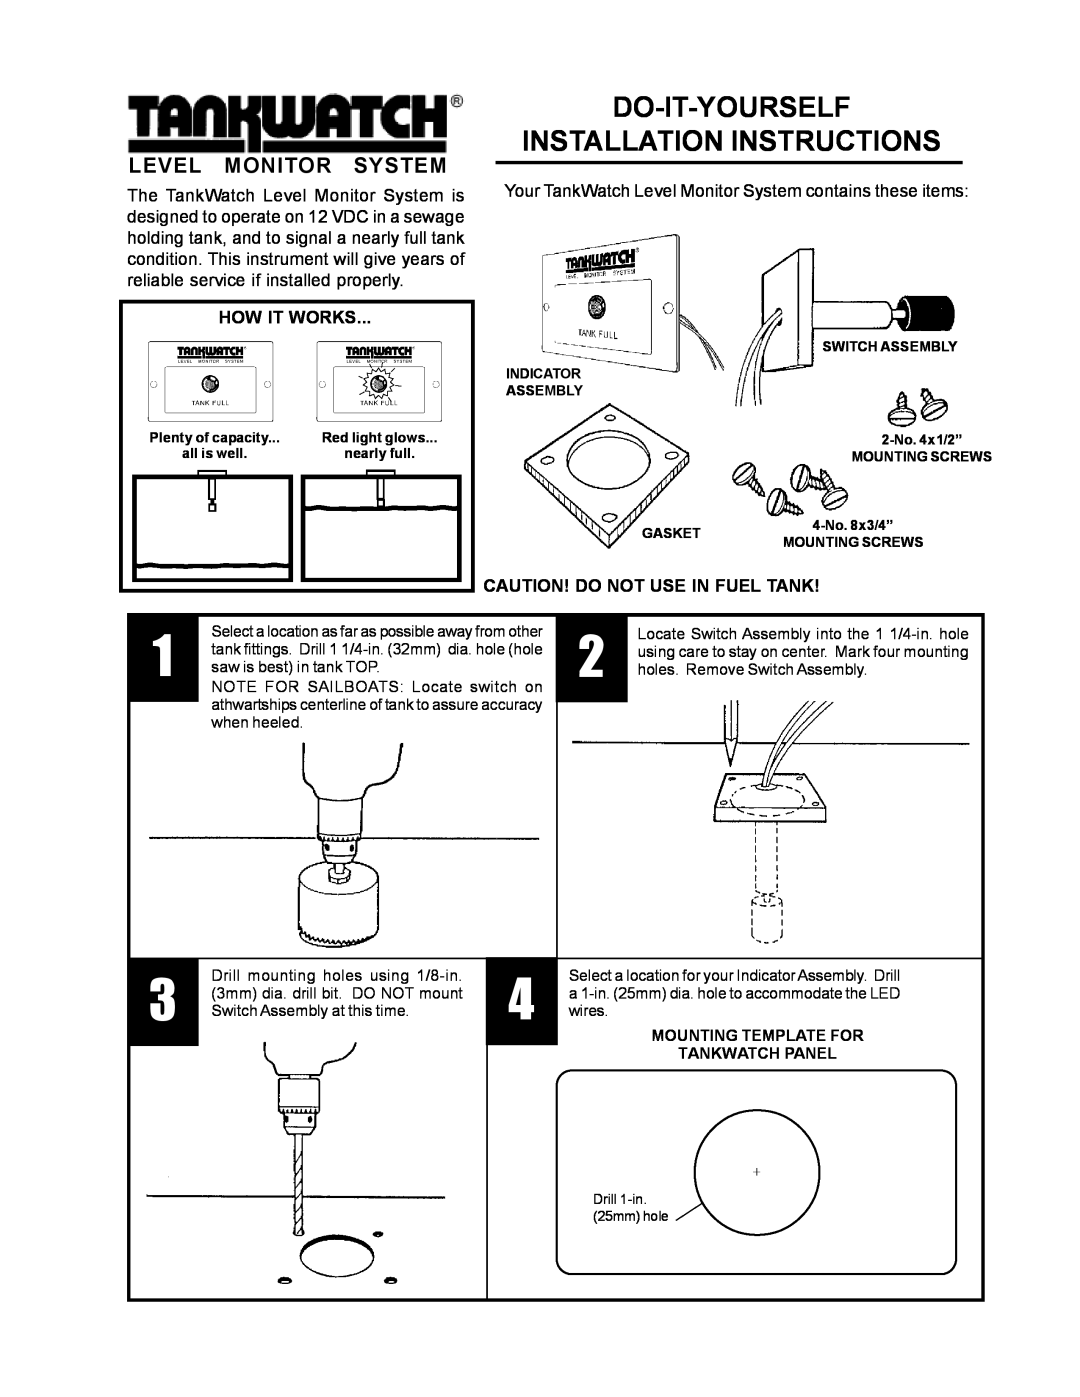 SeaLand TankWatch Level Monitor System installation instructions How It Works, Caution! Do Not Use In Fuel Tank 